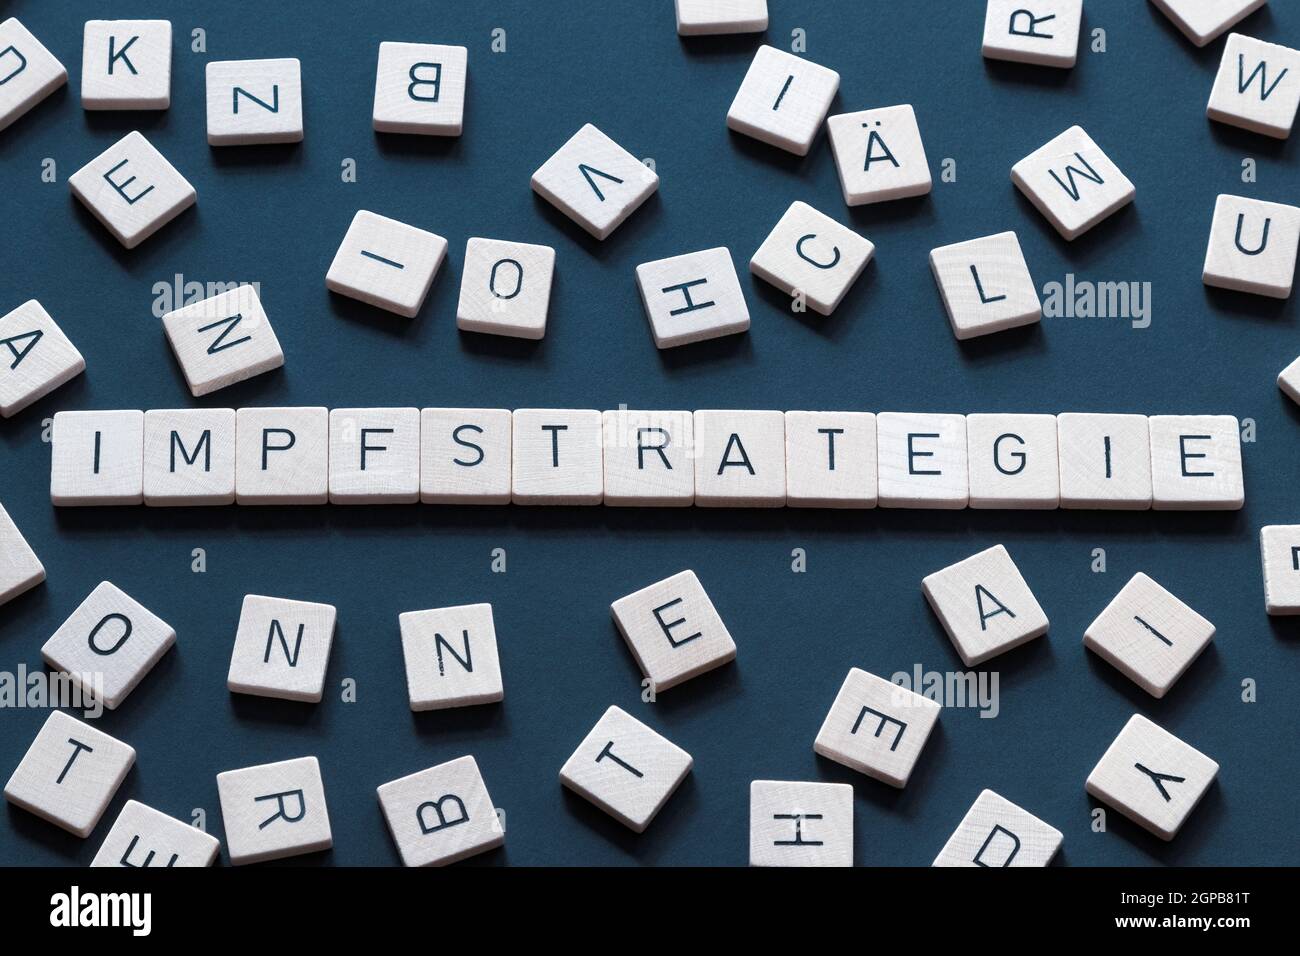 Vaccine strategy in german 'Impfstrategie' the word stands for organization and smooth operation. Word and letters on blue background. Germany Stock Photo